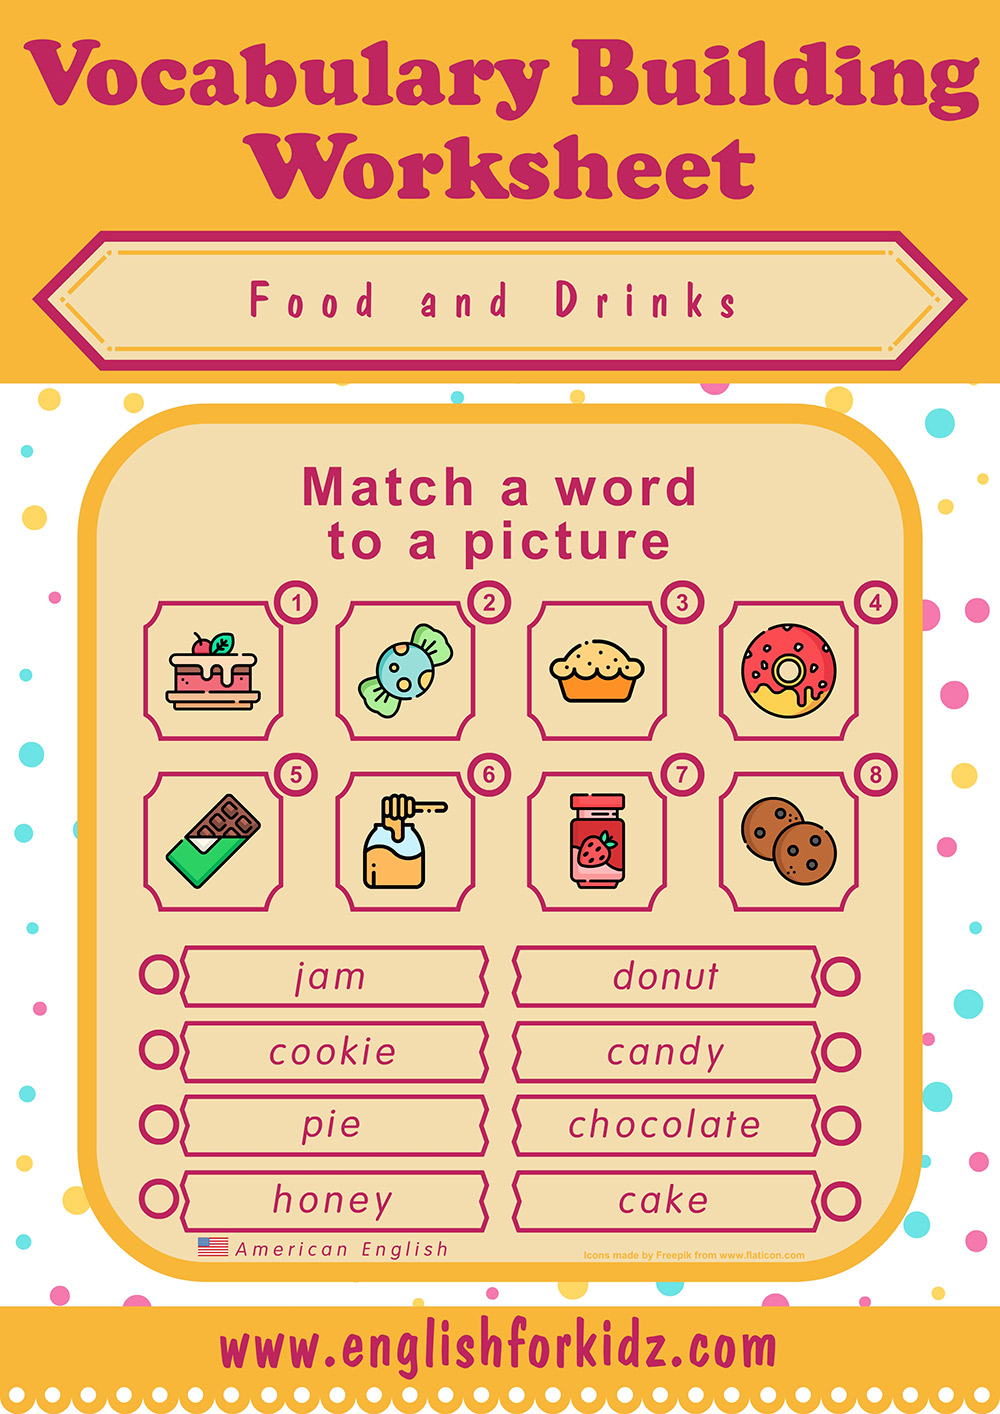 english-for-kids-step-by-step-food-drinks-worksheets-word-to-picture-matching